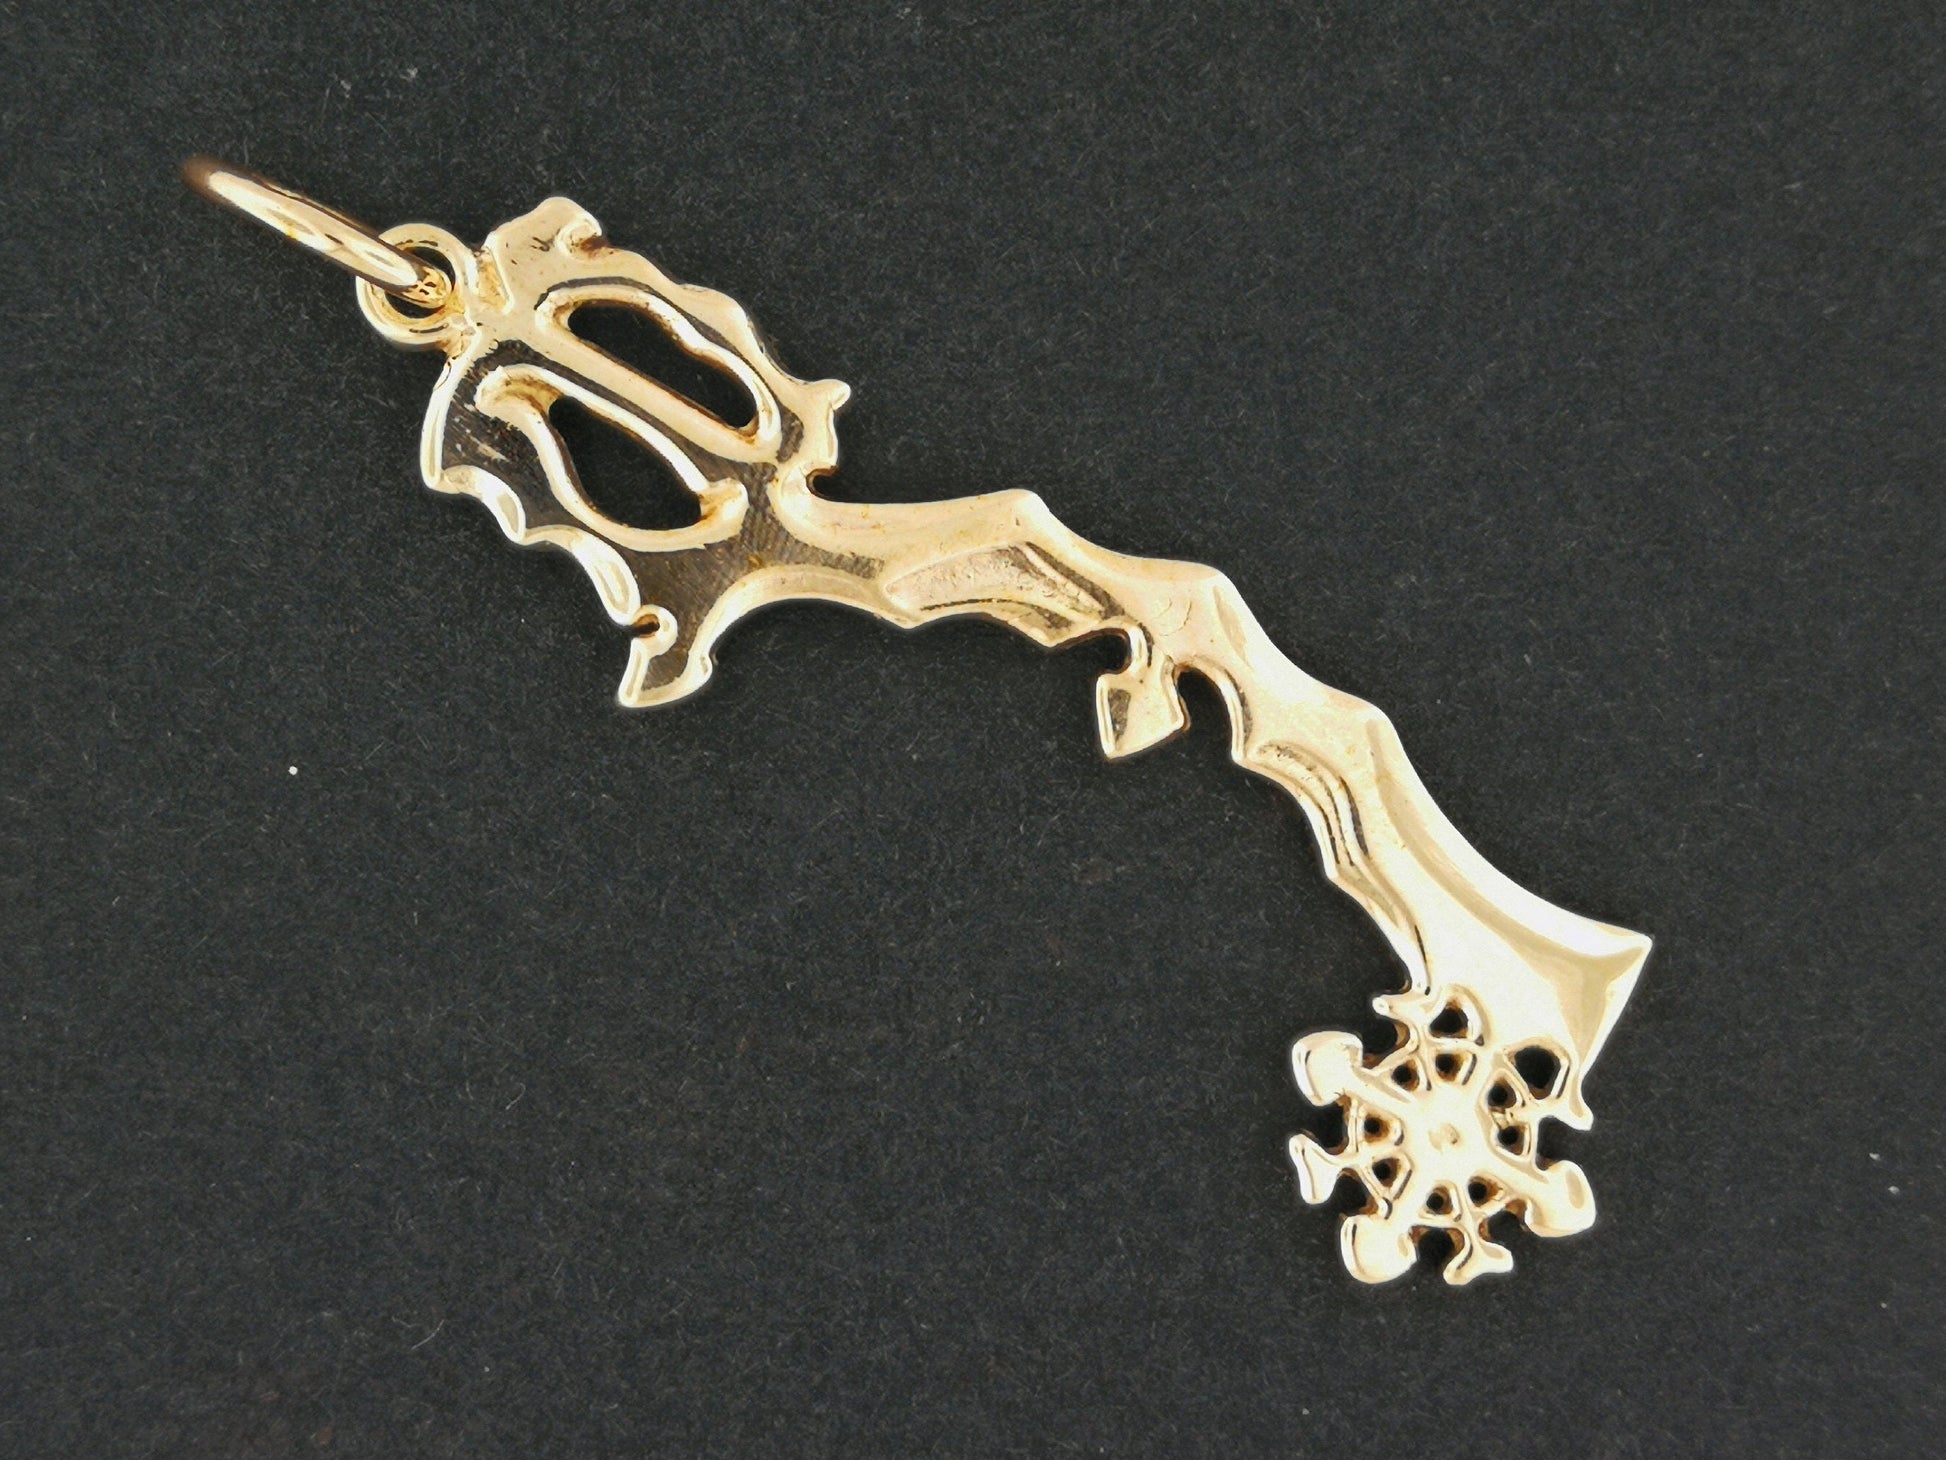 Kingdom Hearts Diamond Dust Keyblade Pendant in Sterling Silver or Antique Bronze, Video Game Jewelry, Video Game Jewellery, Silver Video Game Pendant, Bronze Video Game Pendant, Gamer Girl Pendant, Gamer Girl Jewelry, Gamer Girl Jewellry, Gamer Geek Pendant, Gamer Geek Jewelry, KH Keyblade Pendant, Silver Keyblade Pendant, Bronze Keyblade Pendant, Diamond Dust Pendant, 925 Silver Keyblade, Kingdom Hearts Keyblade Pendant